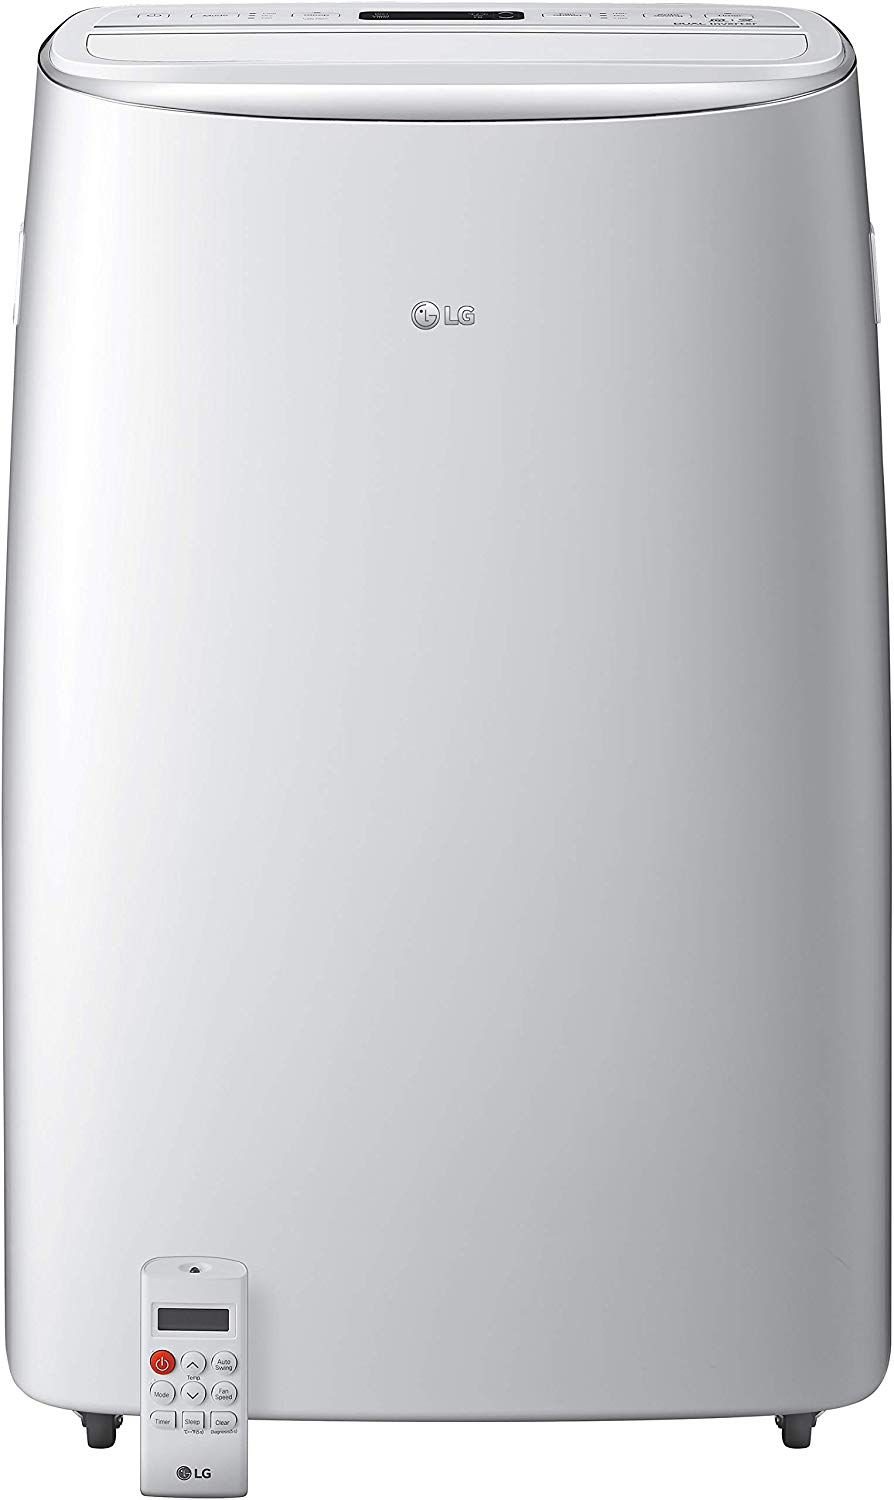 LG Dual Inverter Technology Air Conditioner